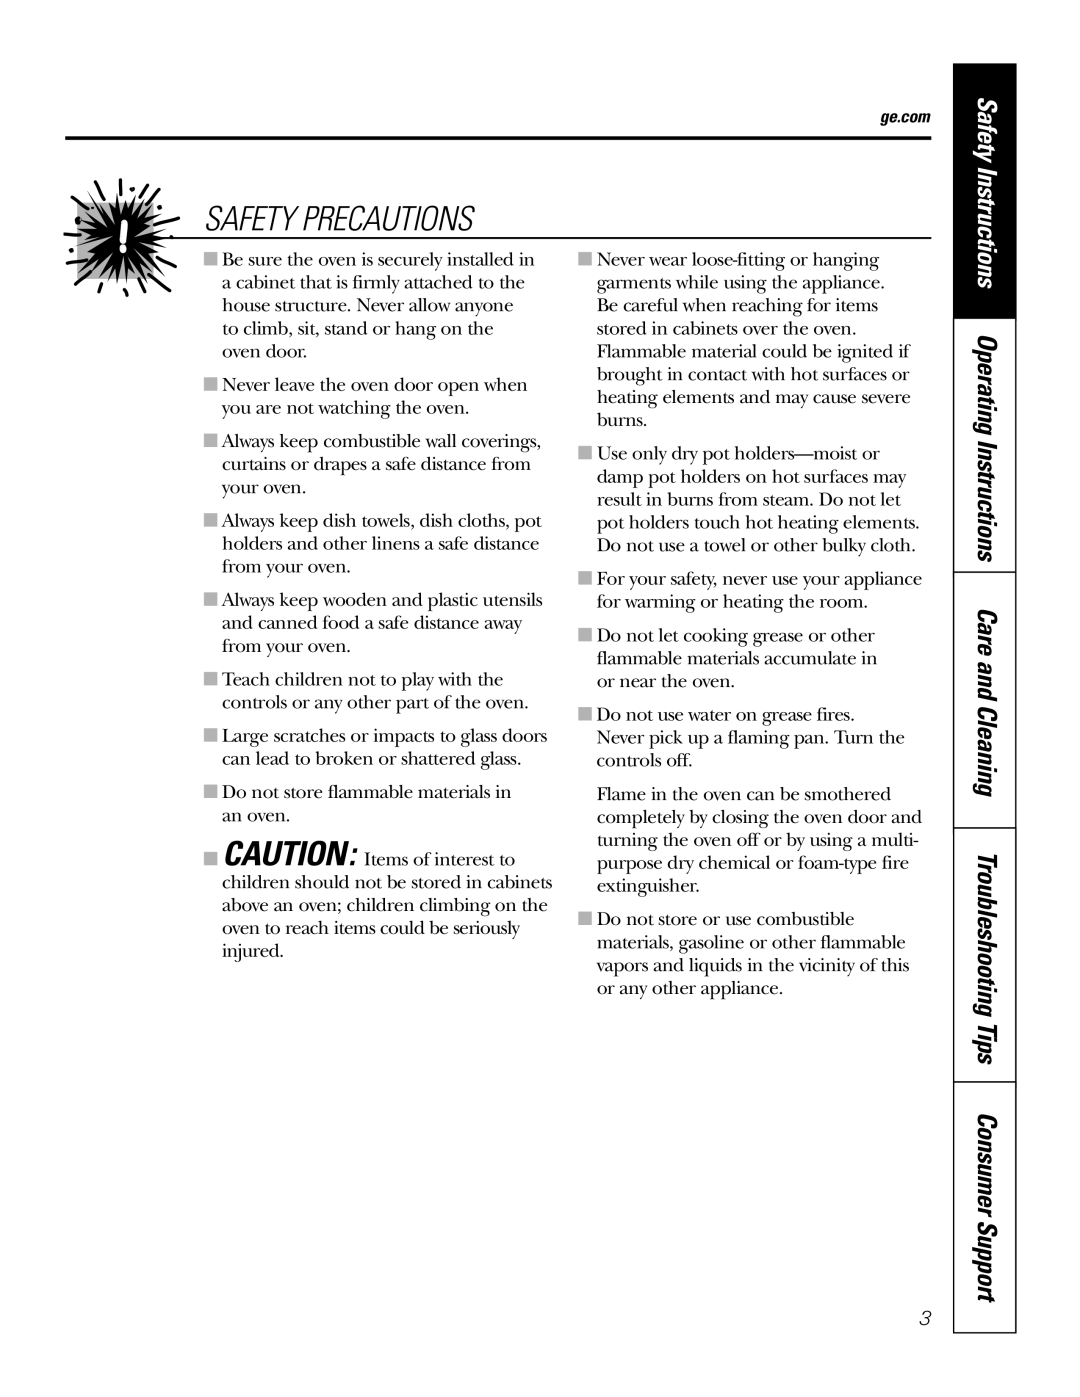 GE JKS06 owner manual Safety Precautions, Do not store flammable materials in an oven 